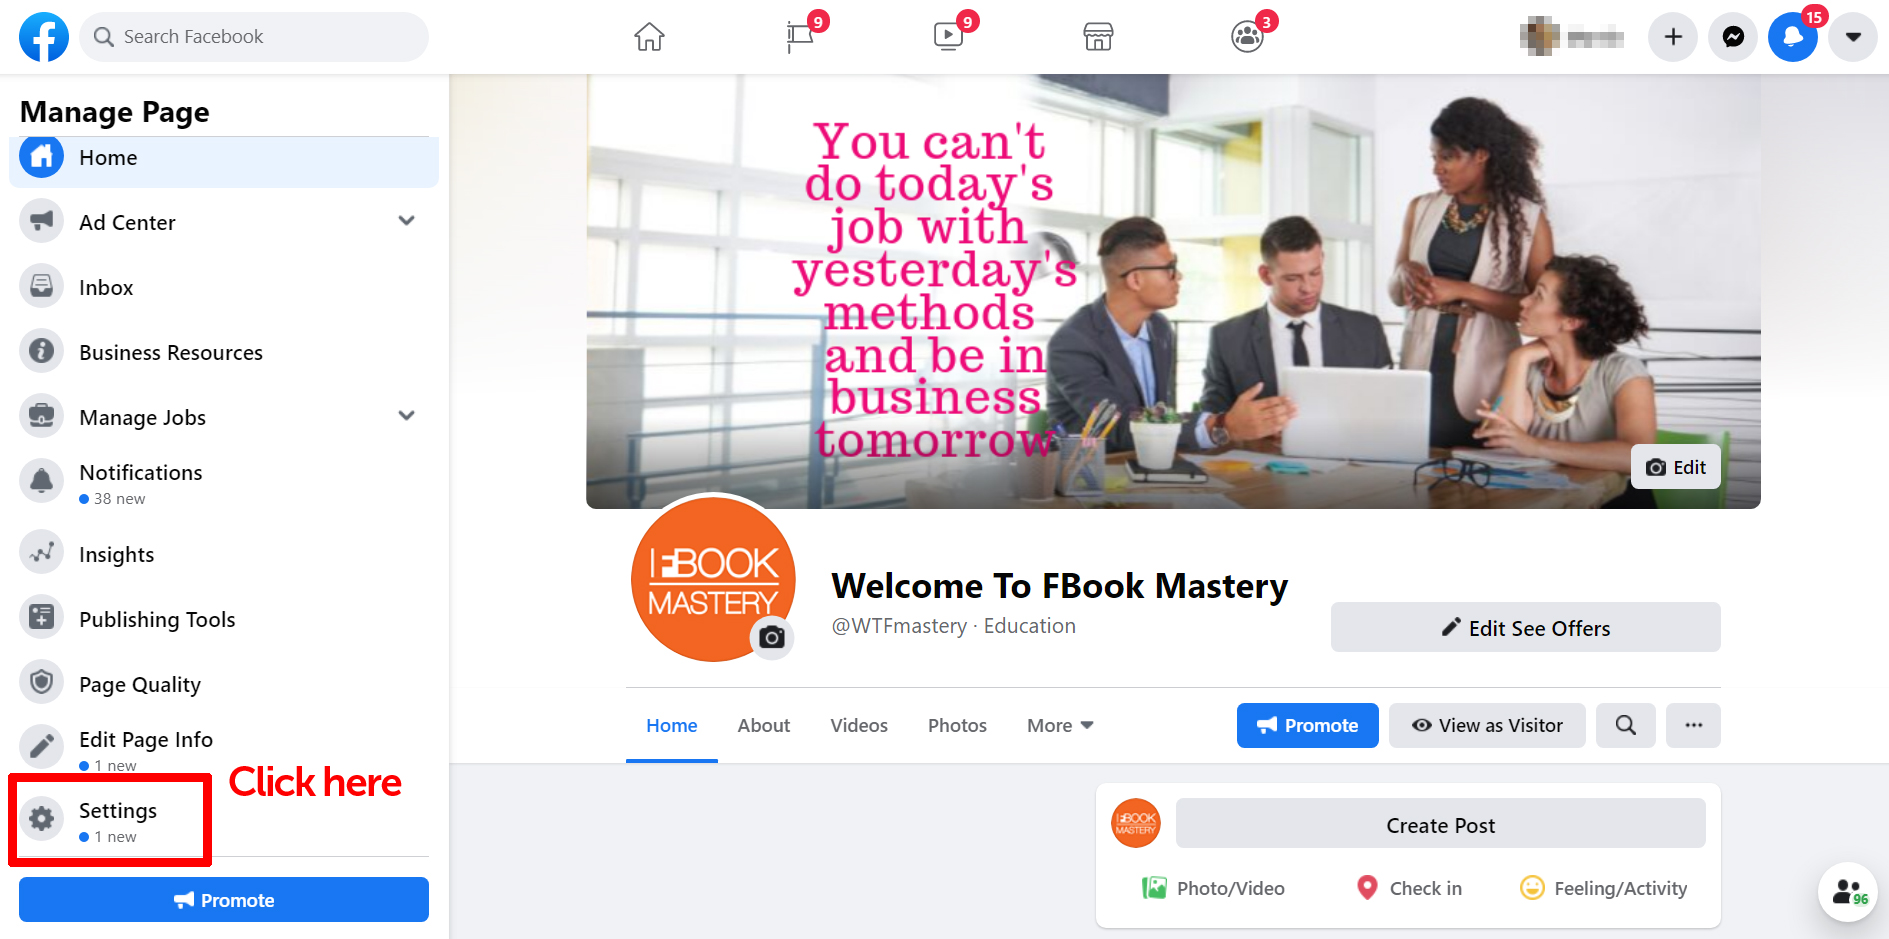 FBook Mastery - Add admin to your Facebook Page